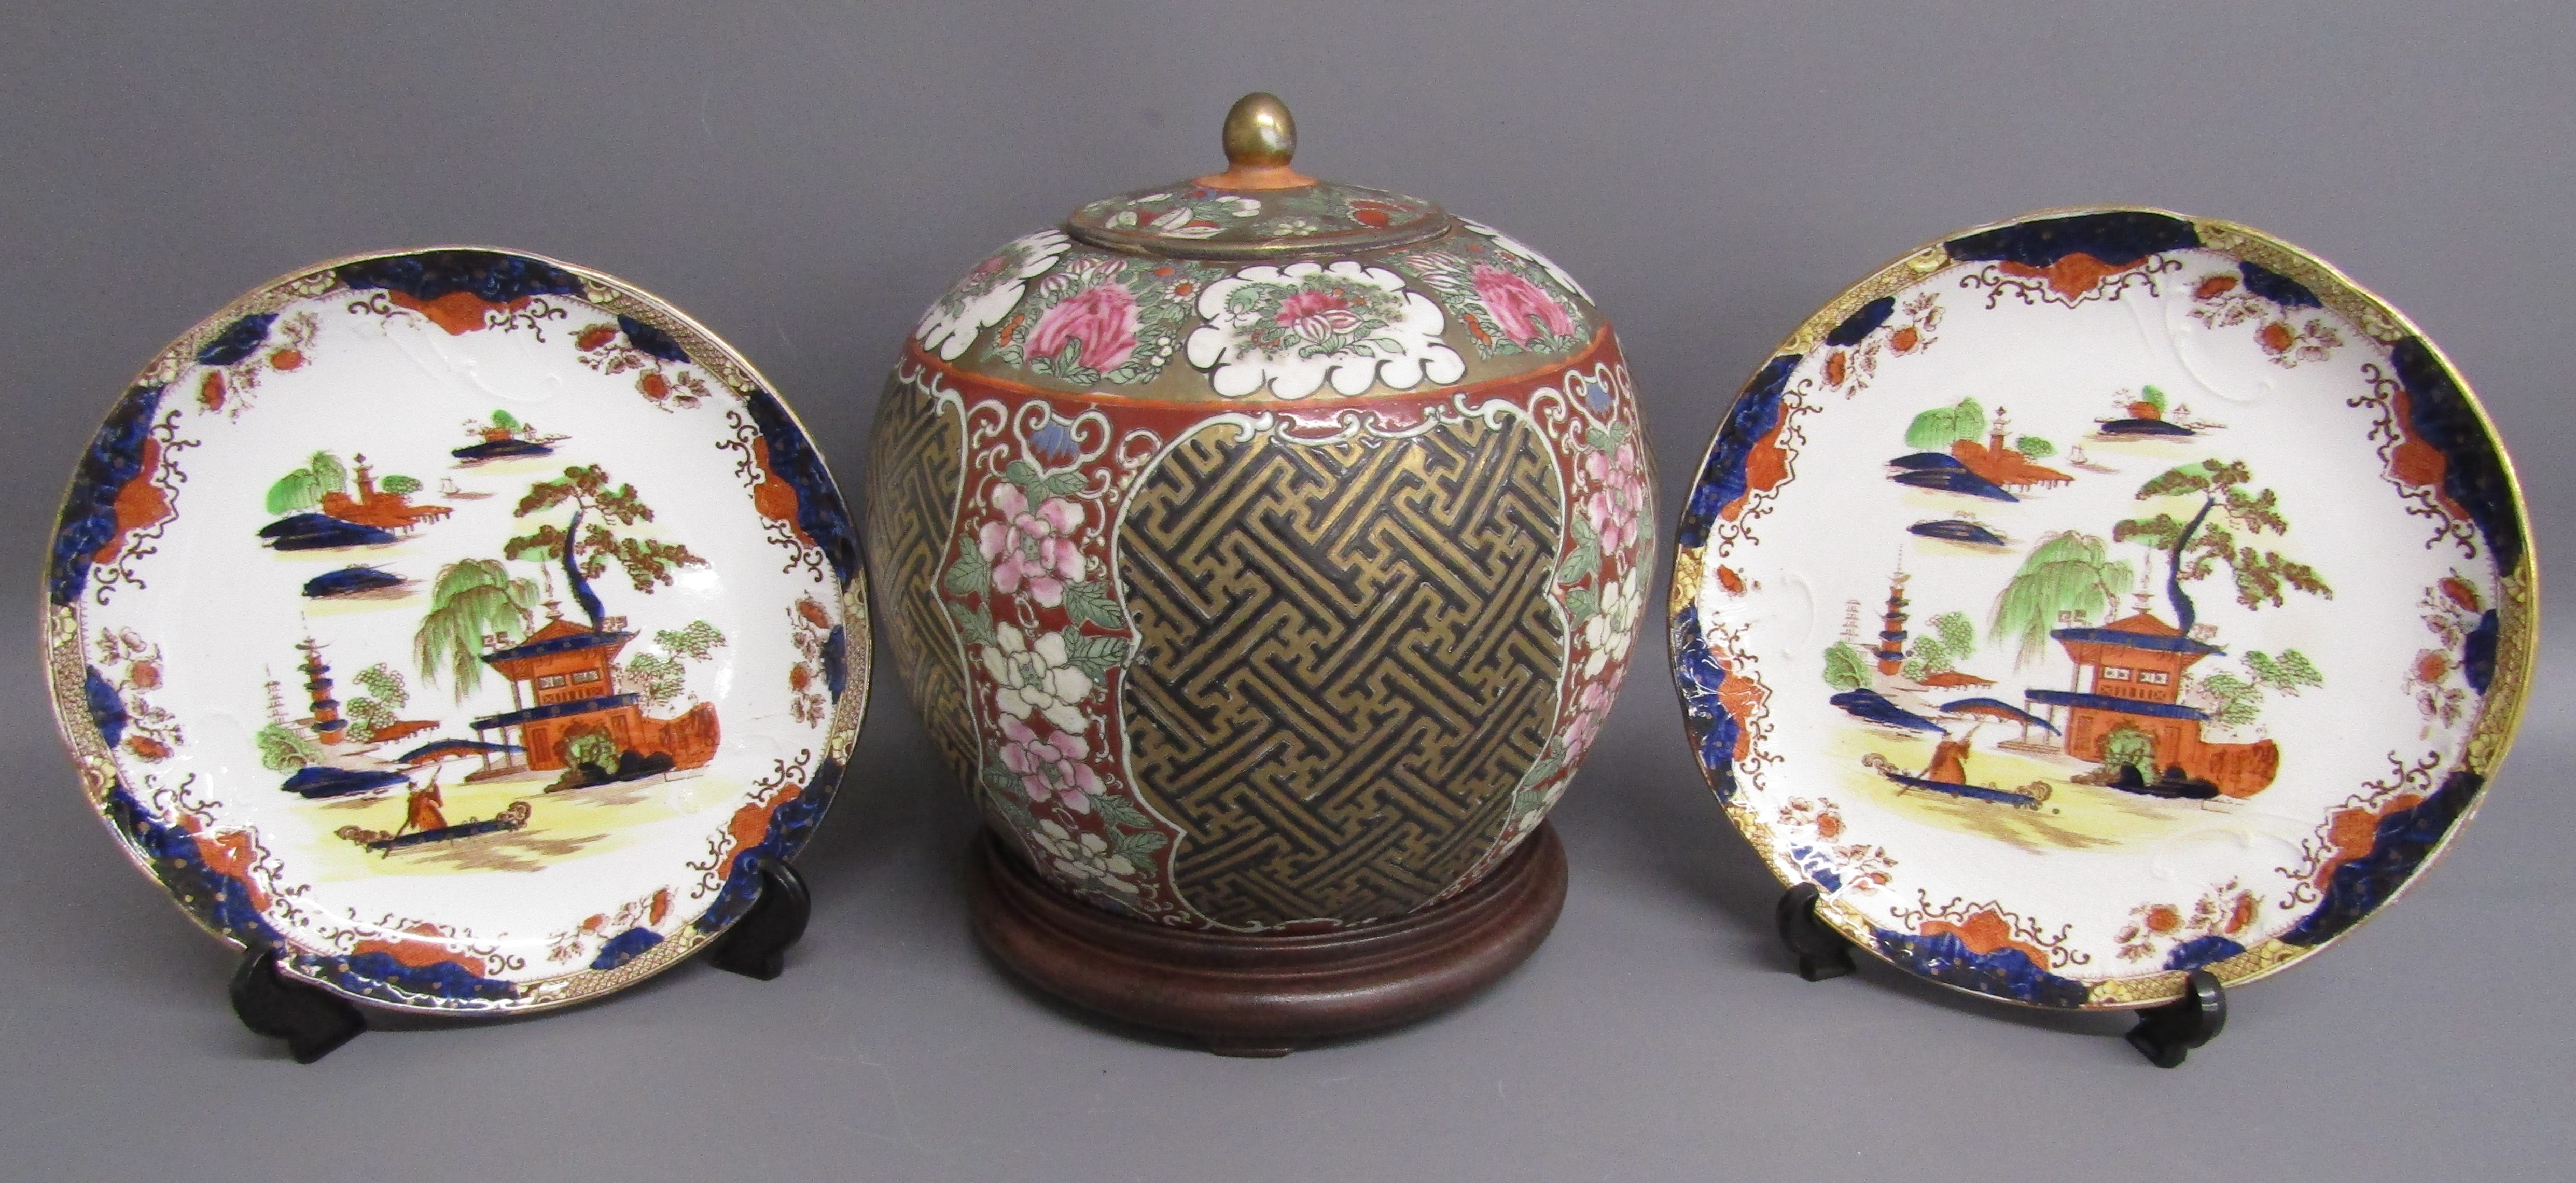 Chinese porcelain lidded pot with Qianlong mark and Made in Macau sticker on base placed on hardwood